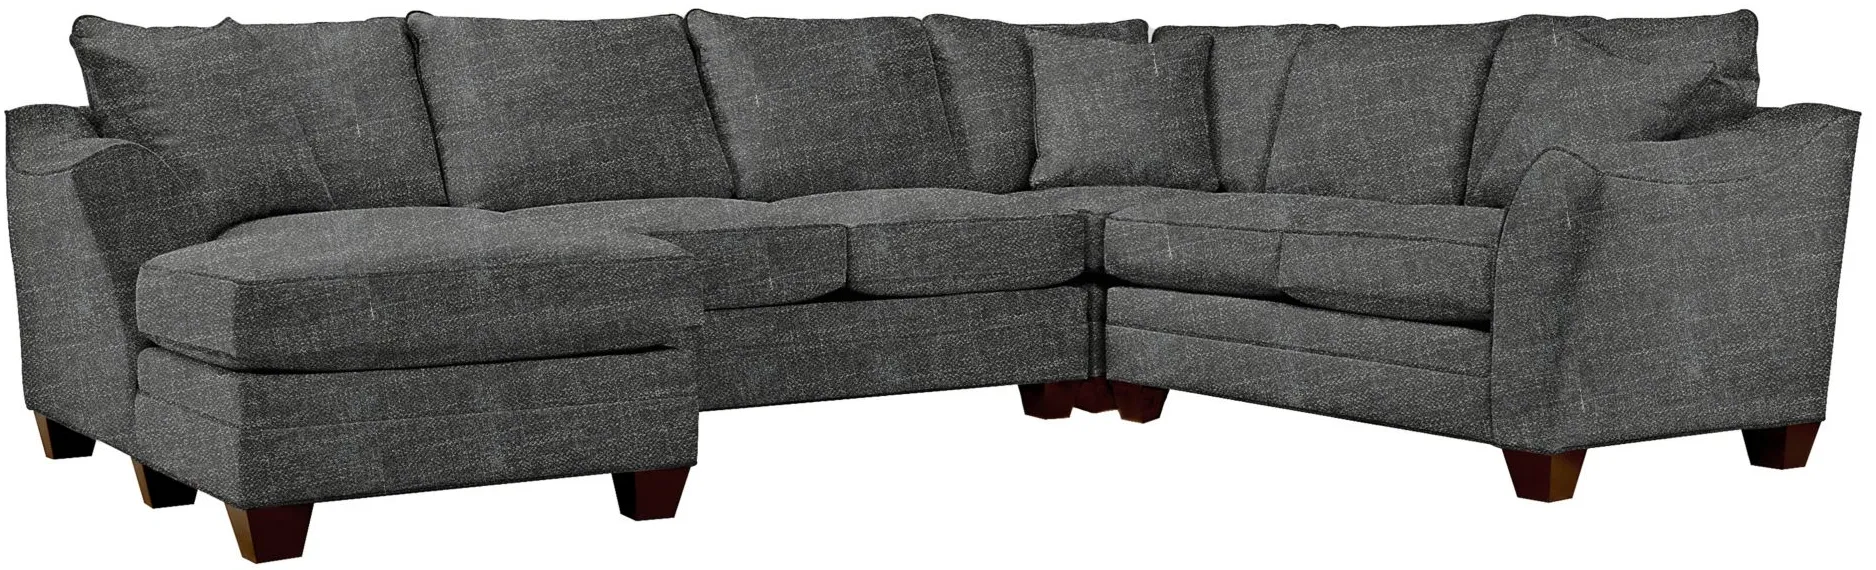 Foresthill 4-pc. Left Hand Chaise Sectional Sofa in Elliot Graphite by H.M. Richards